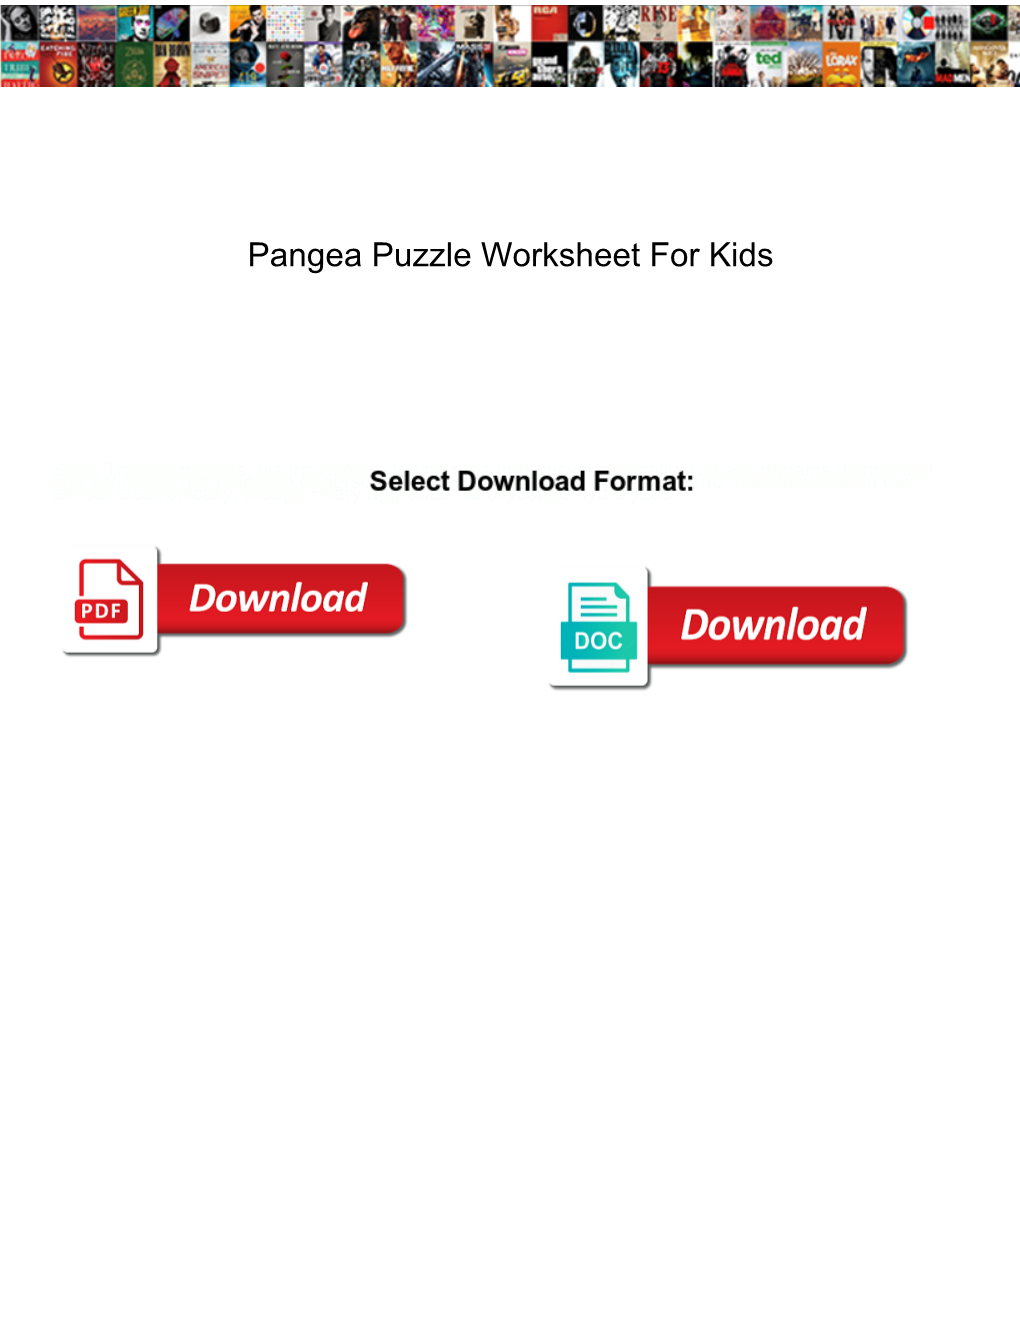 Pangea Puzzle Worksheet for Kids